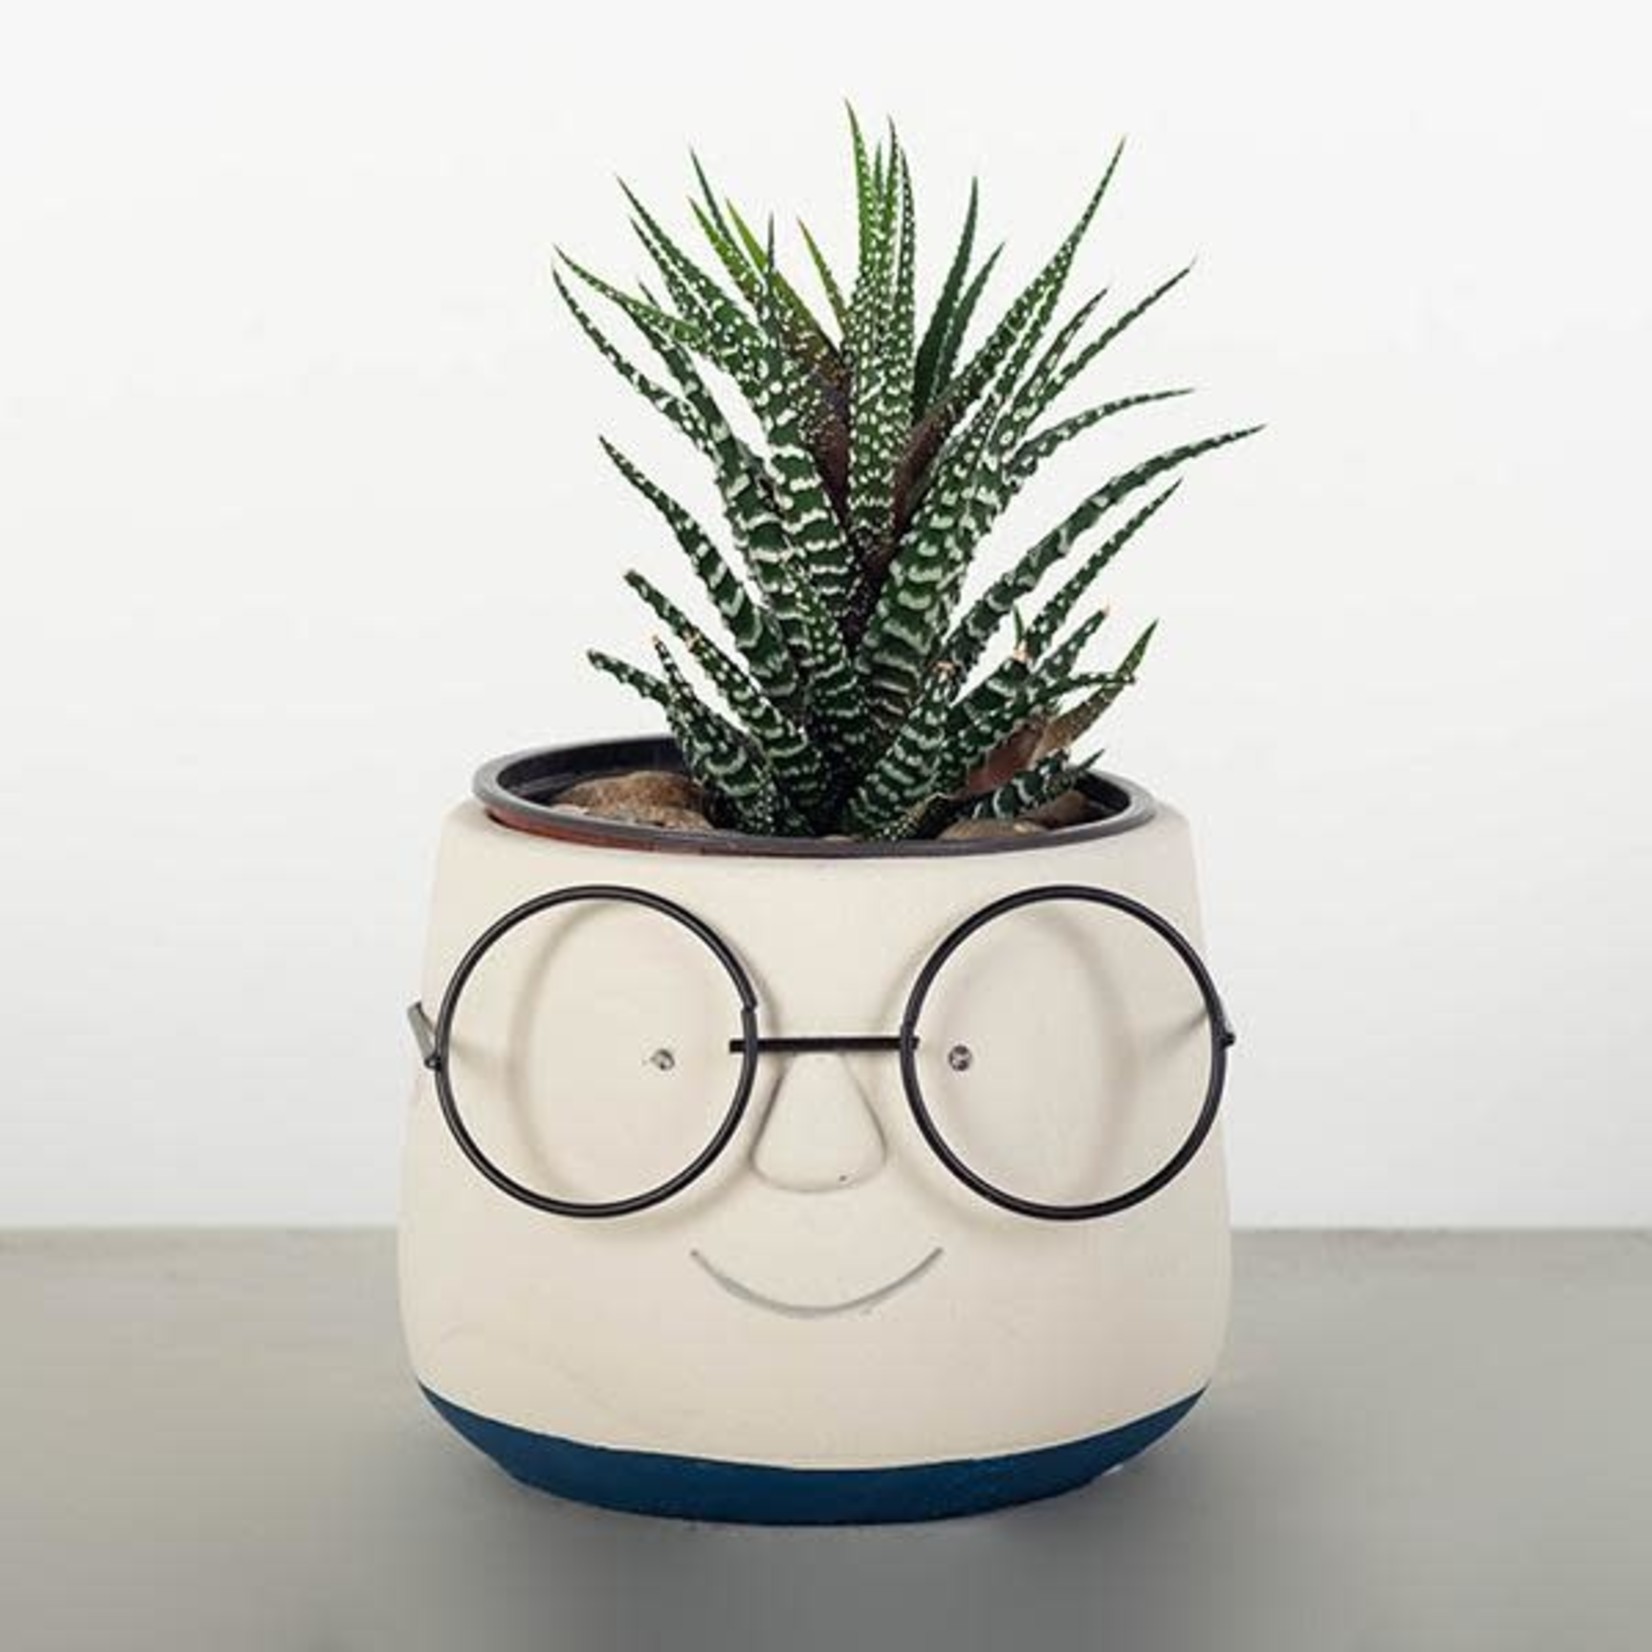 Forpost Trade Face with Glasses Pot - 4"